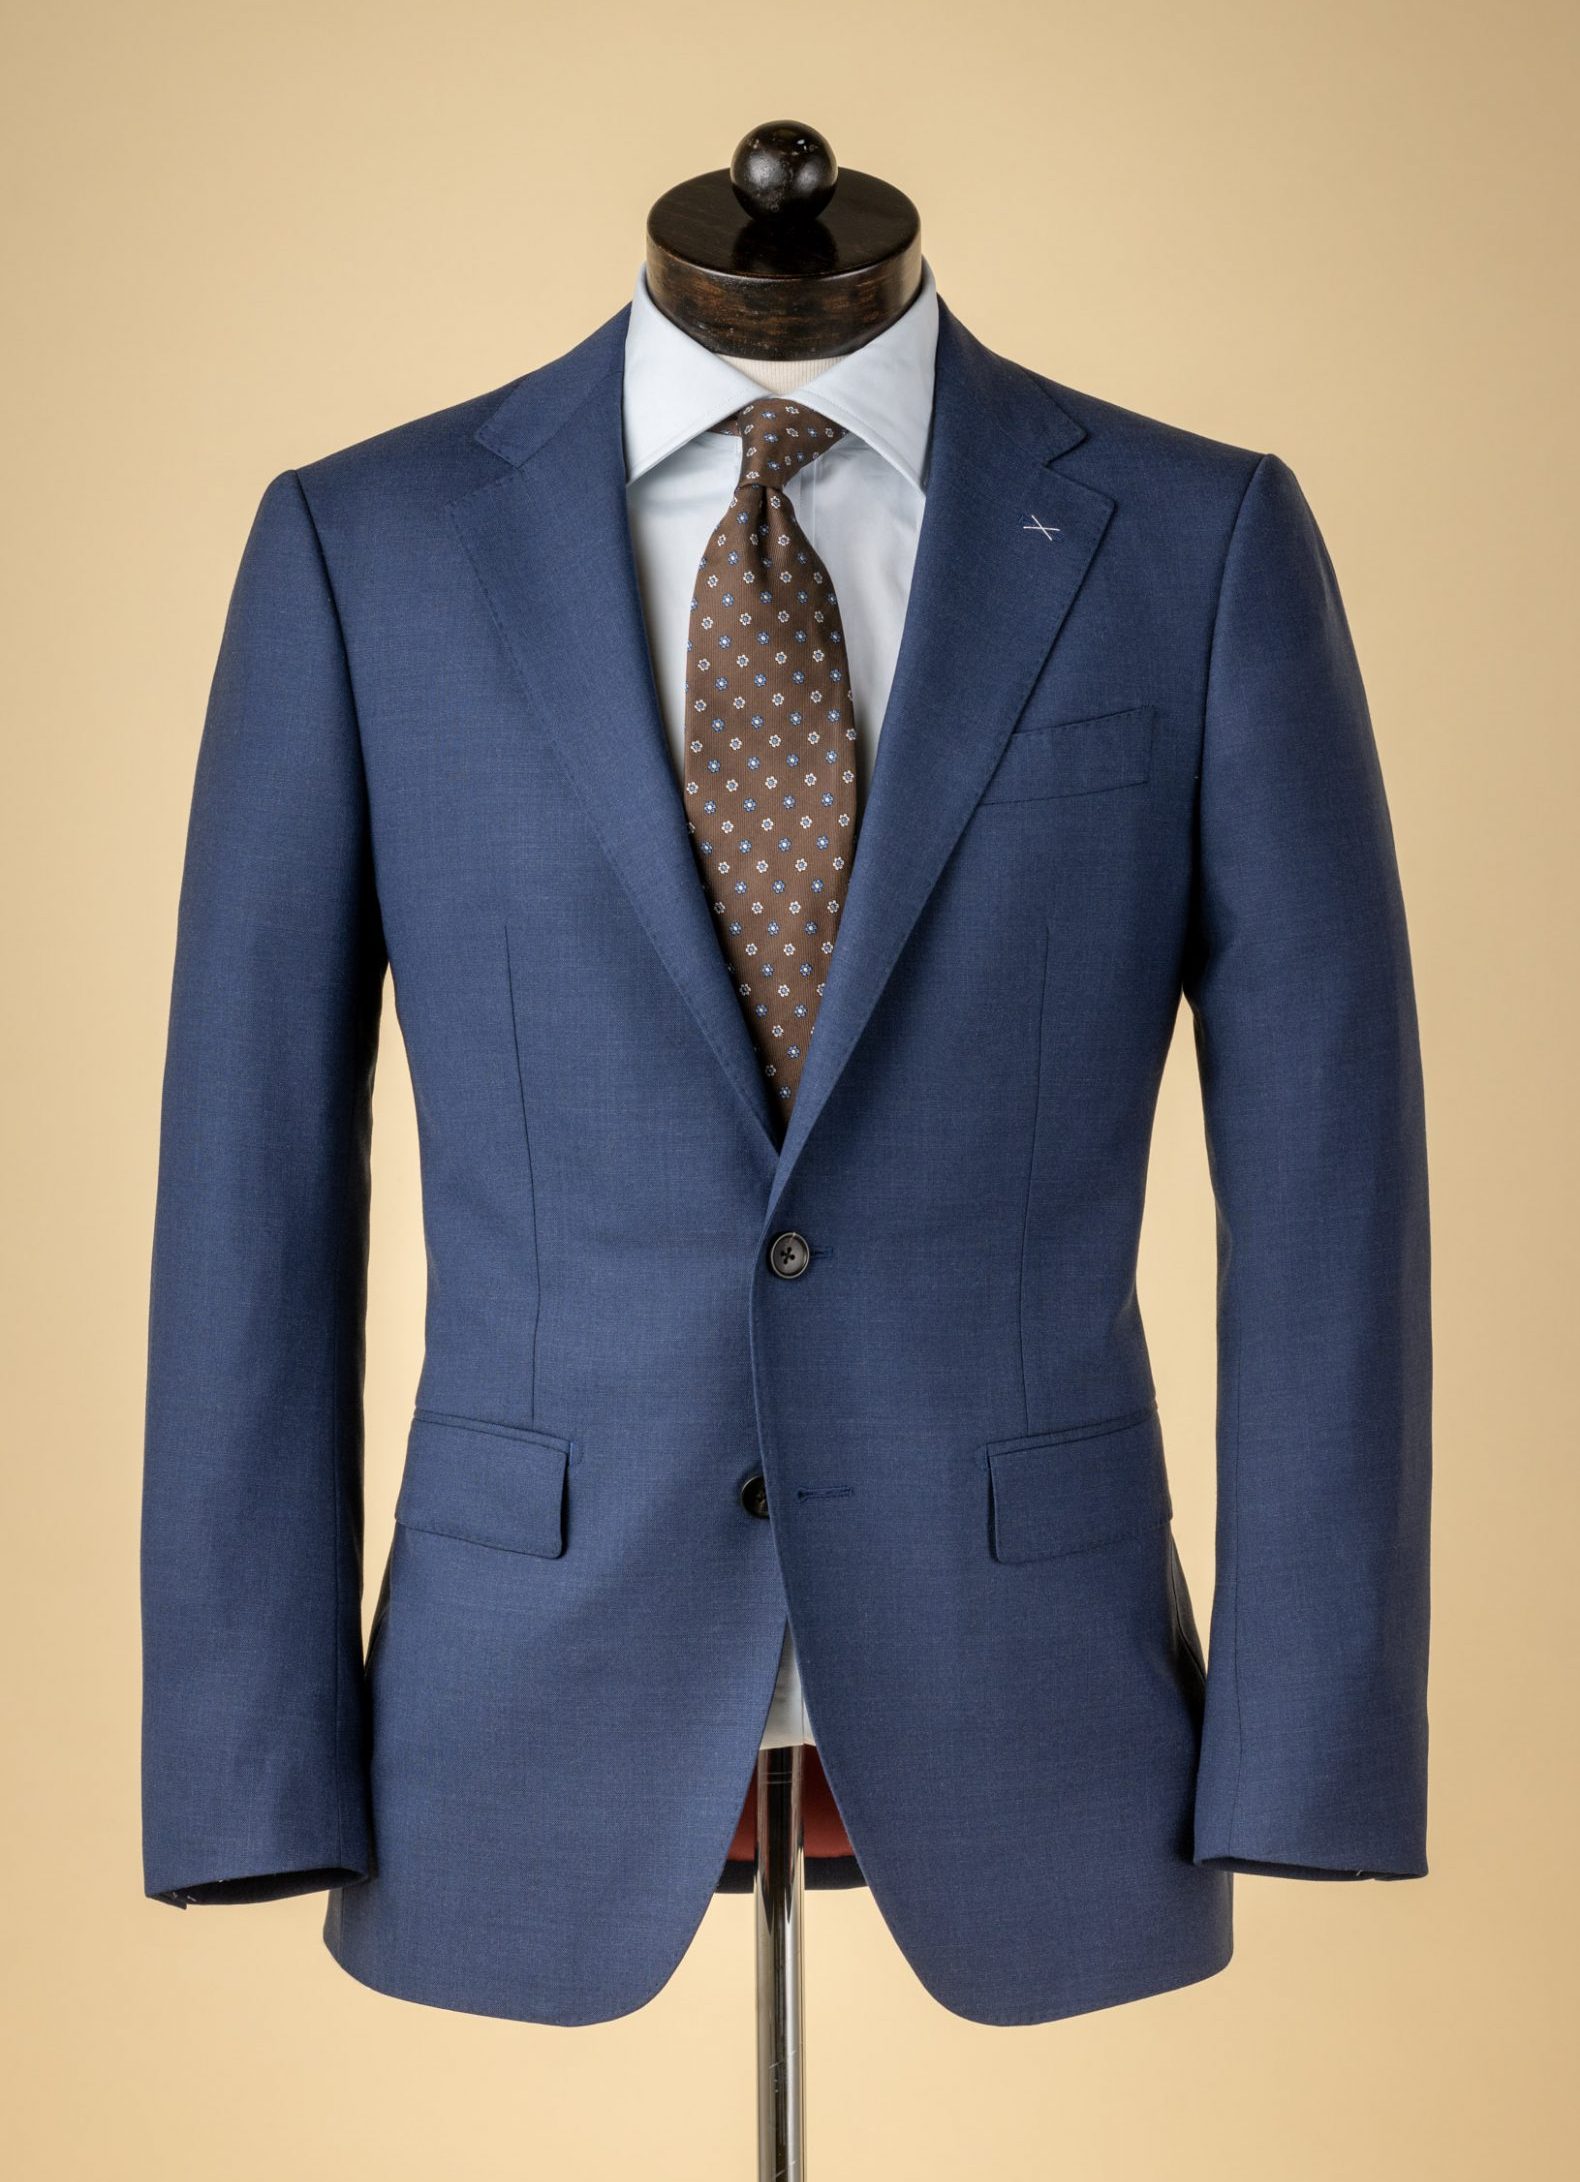 Reviewed: Spier & Mackay off the rack suits - fit, style, quality